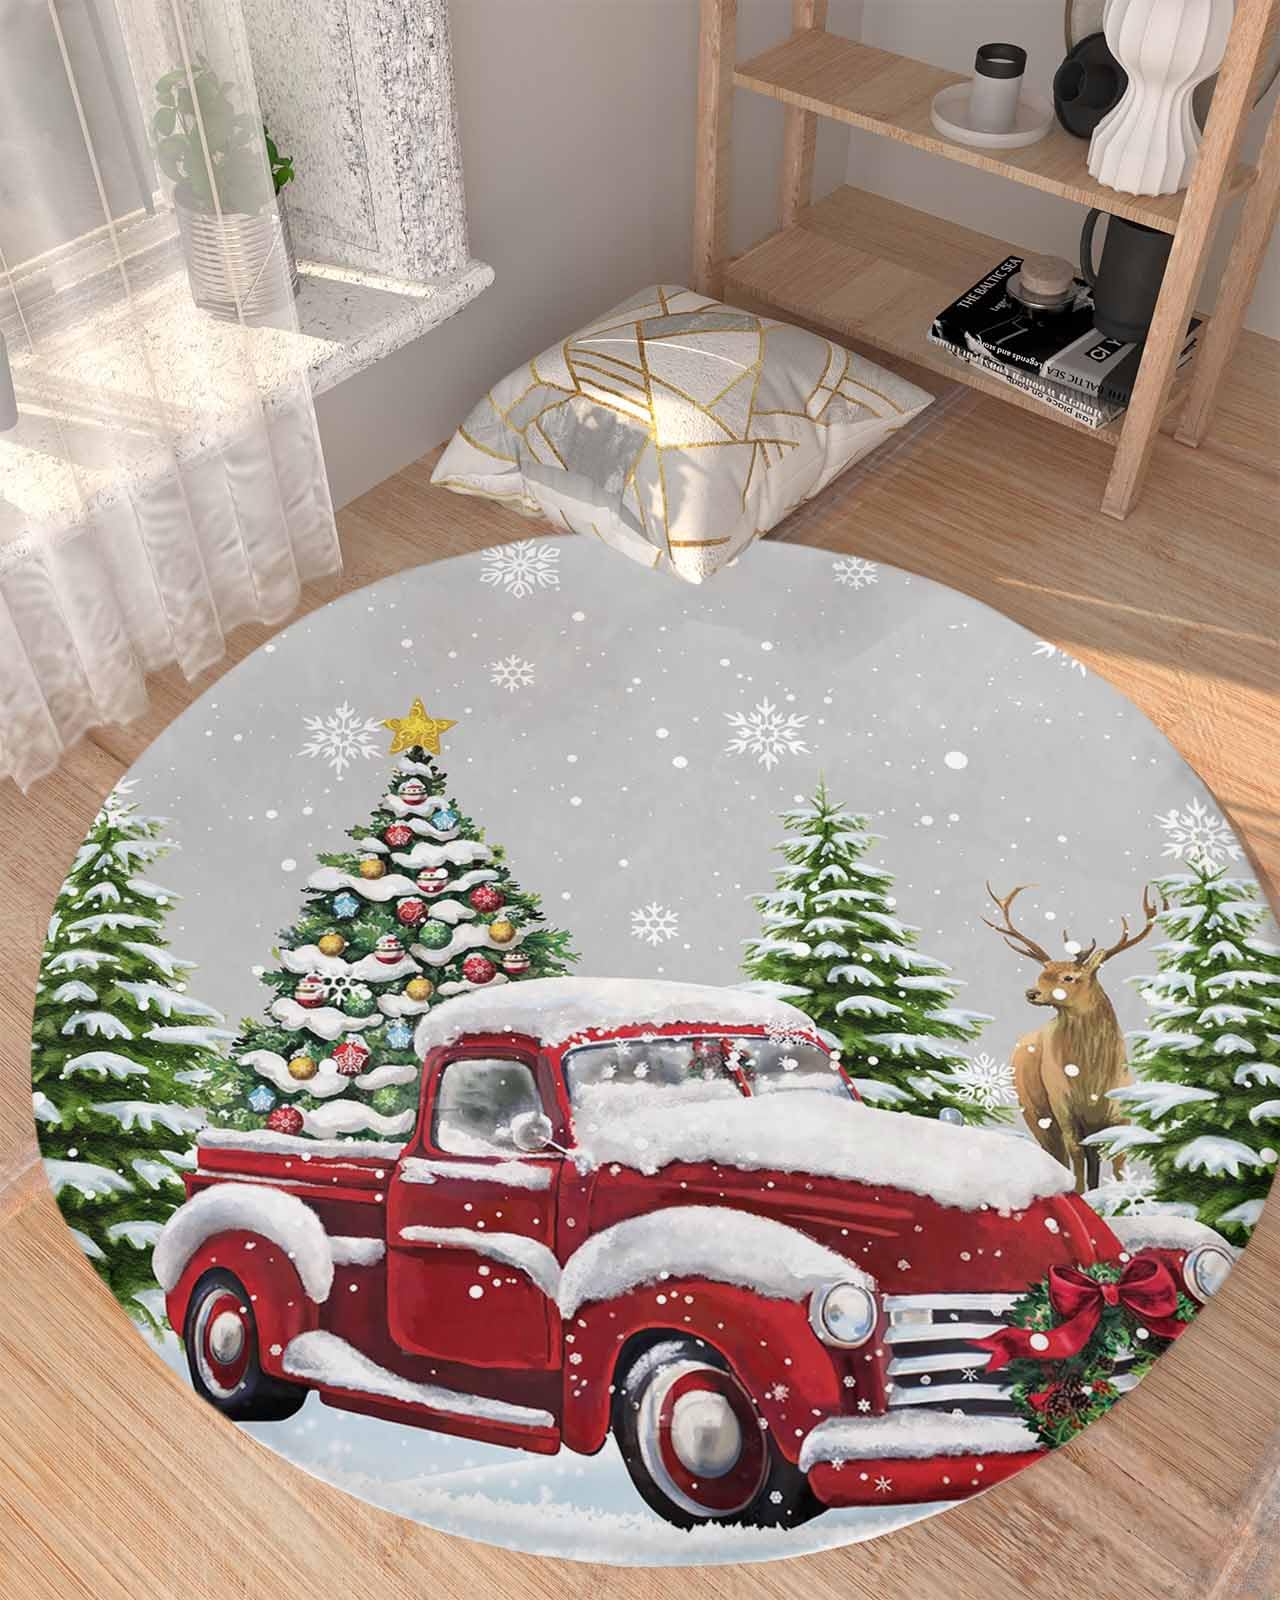 Christmas Fluffy Round Area Rug Carpets 3ft, Plush Shaggy Carpet Soft Circular Rugs, Non-Slip Fuzzy Accent Floor Mat for Living Room Bedroom Nursery Decor Snowy Red Truck Forest Winter Elk Tree Grey